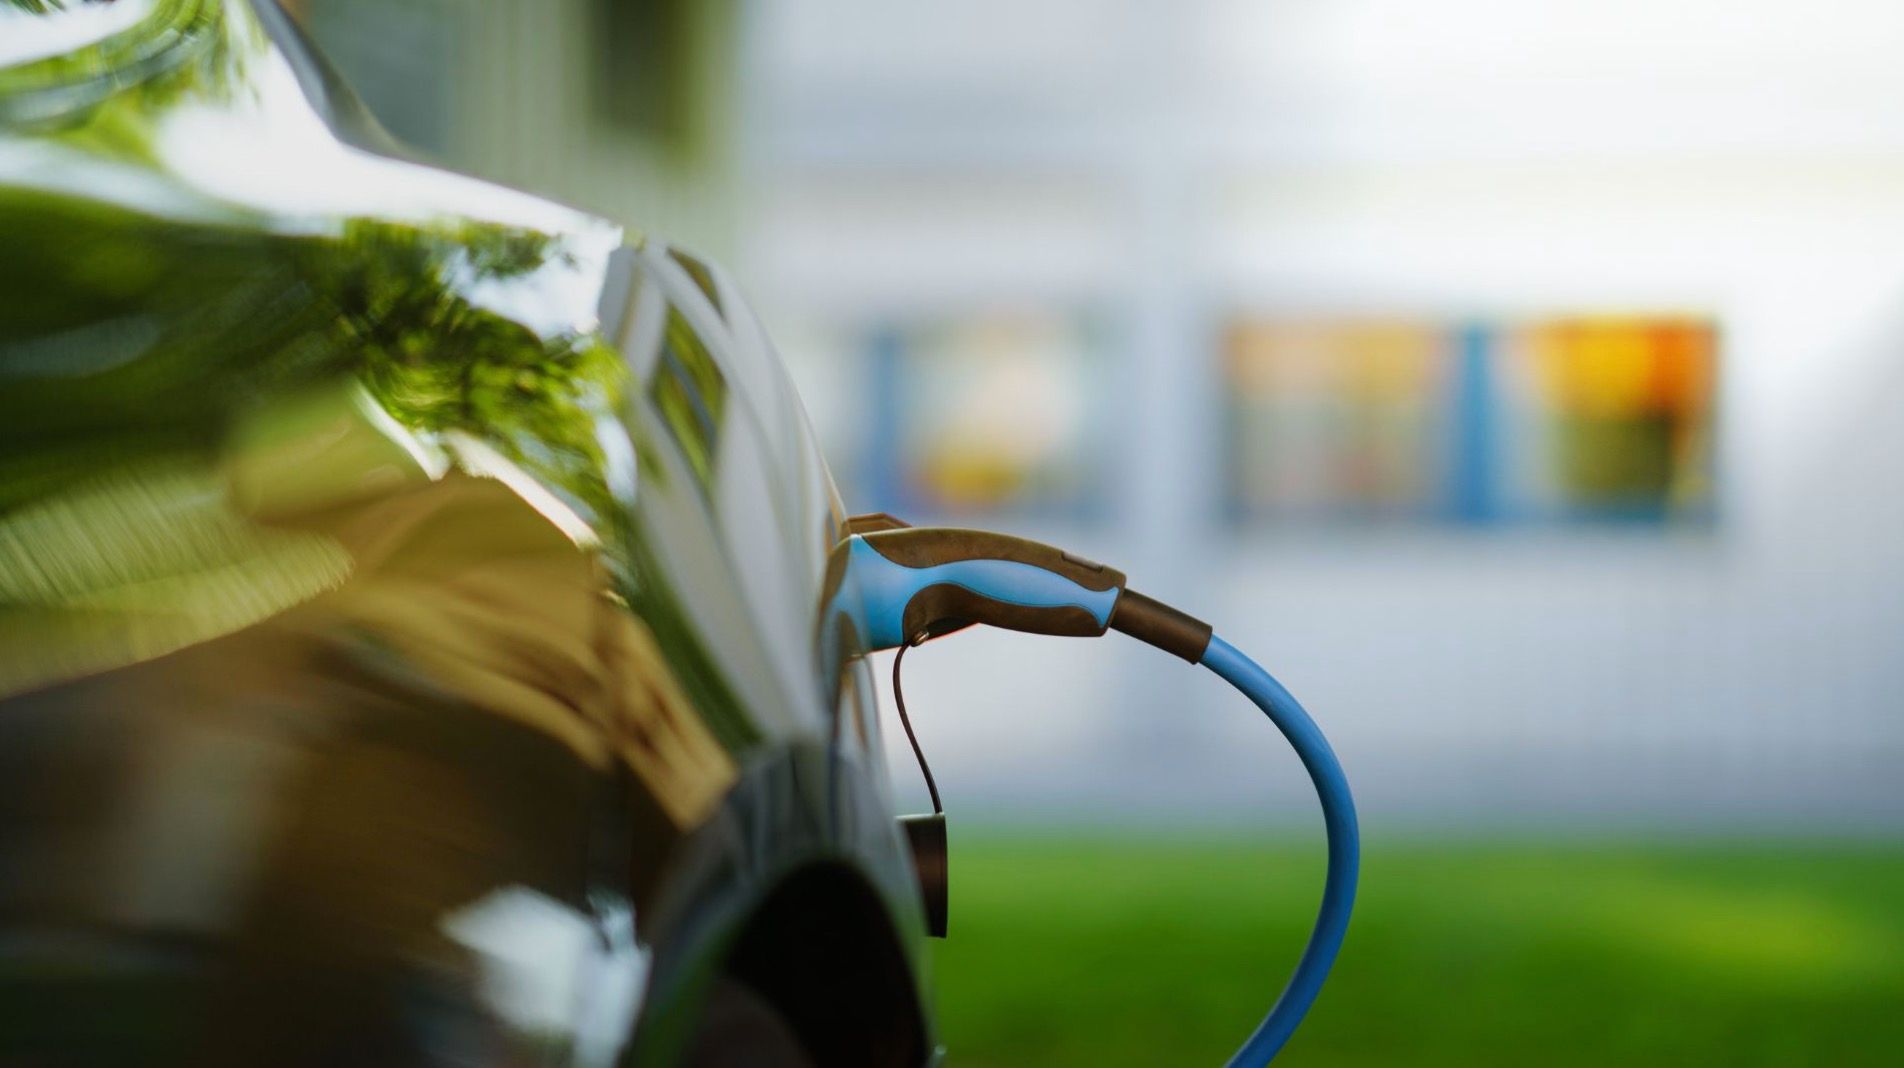 Electric Vehicles Linked to Reduction In Air Pollution